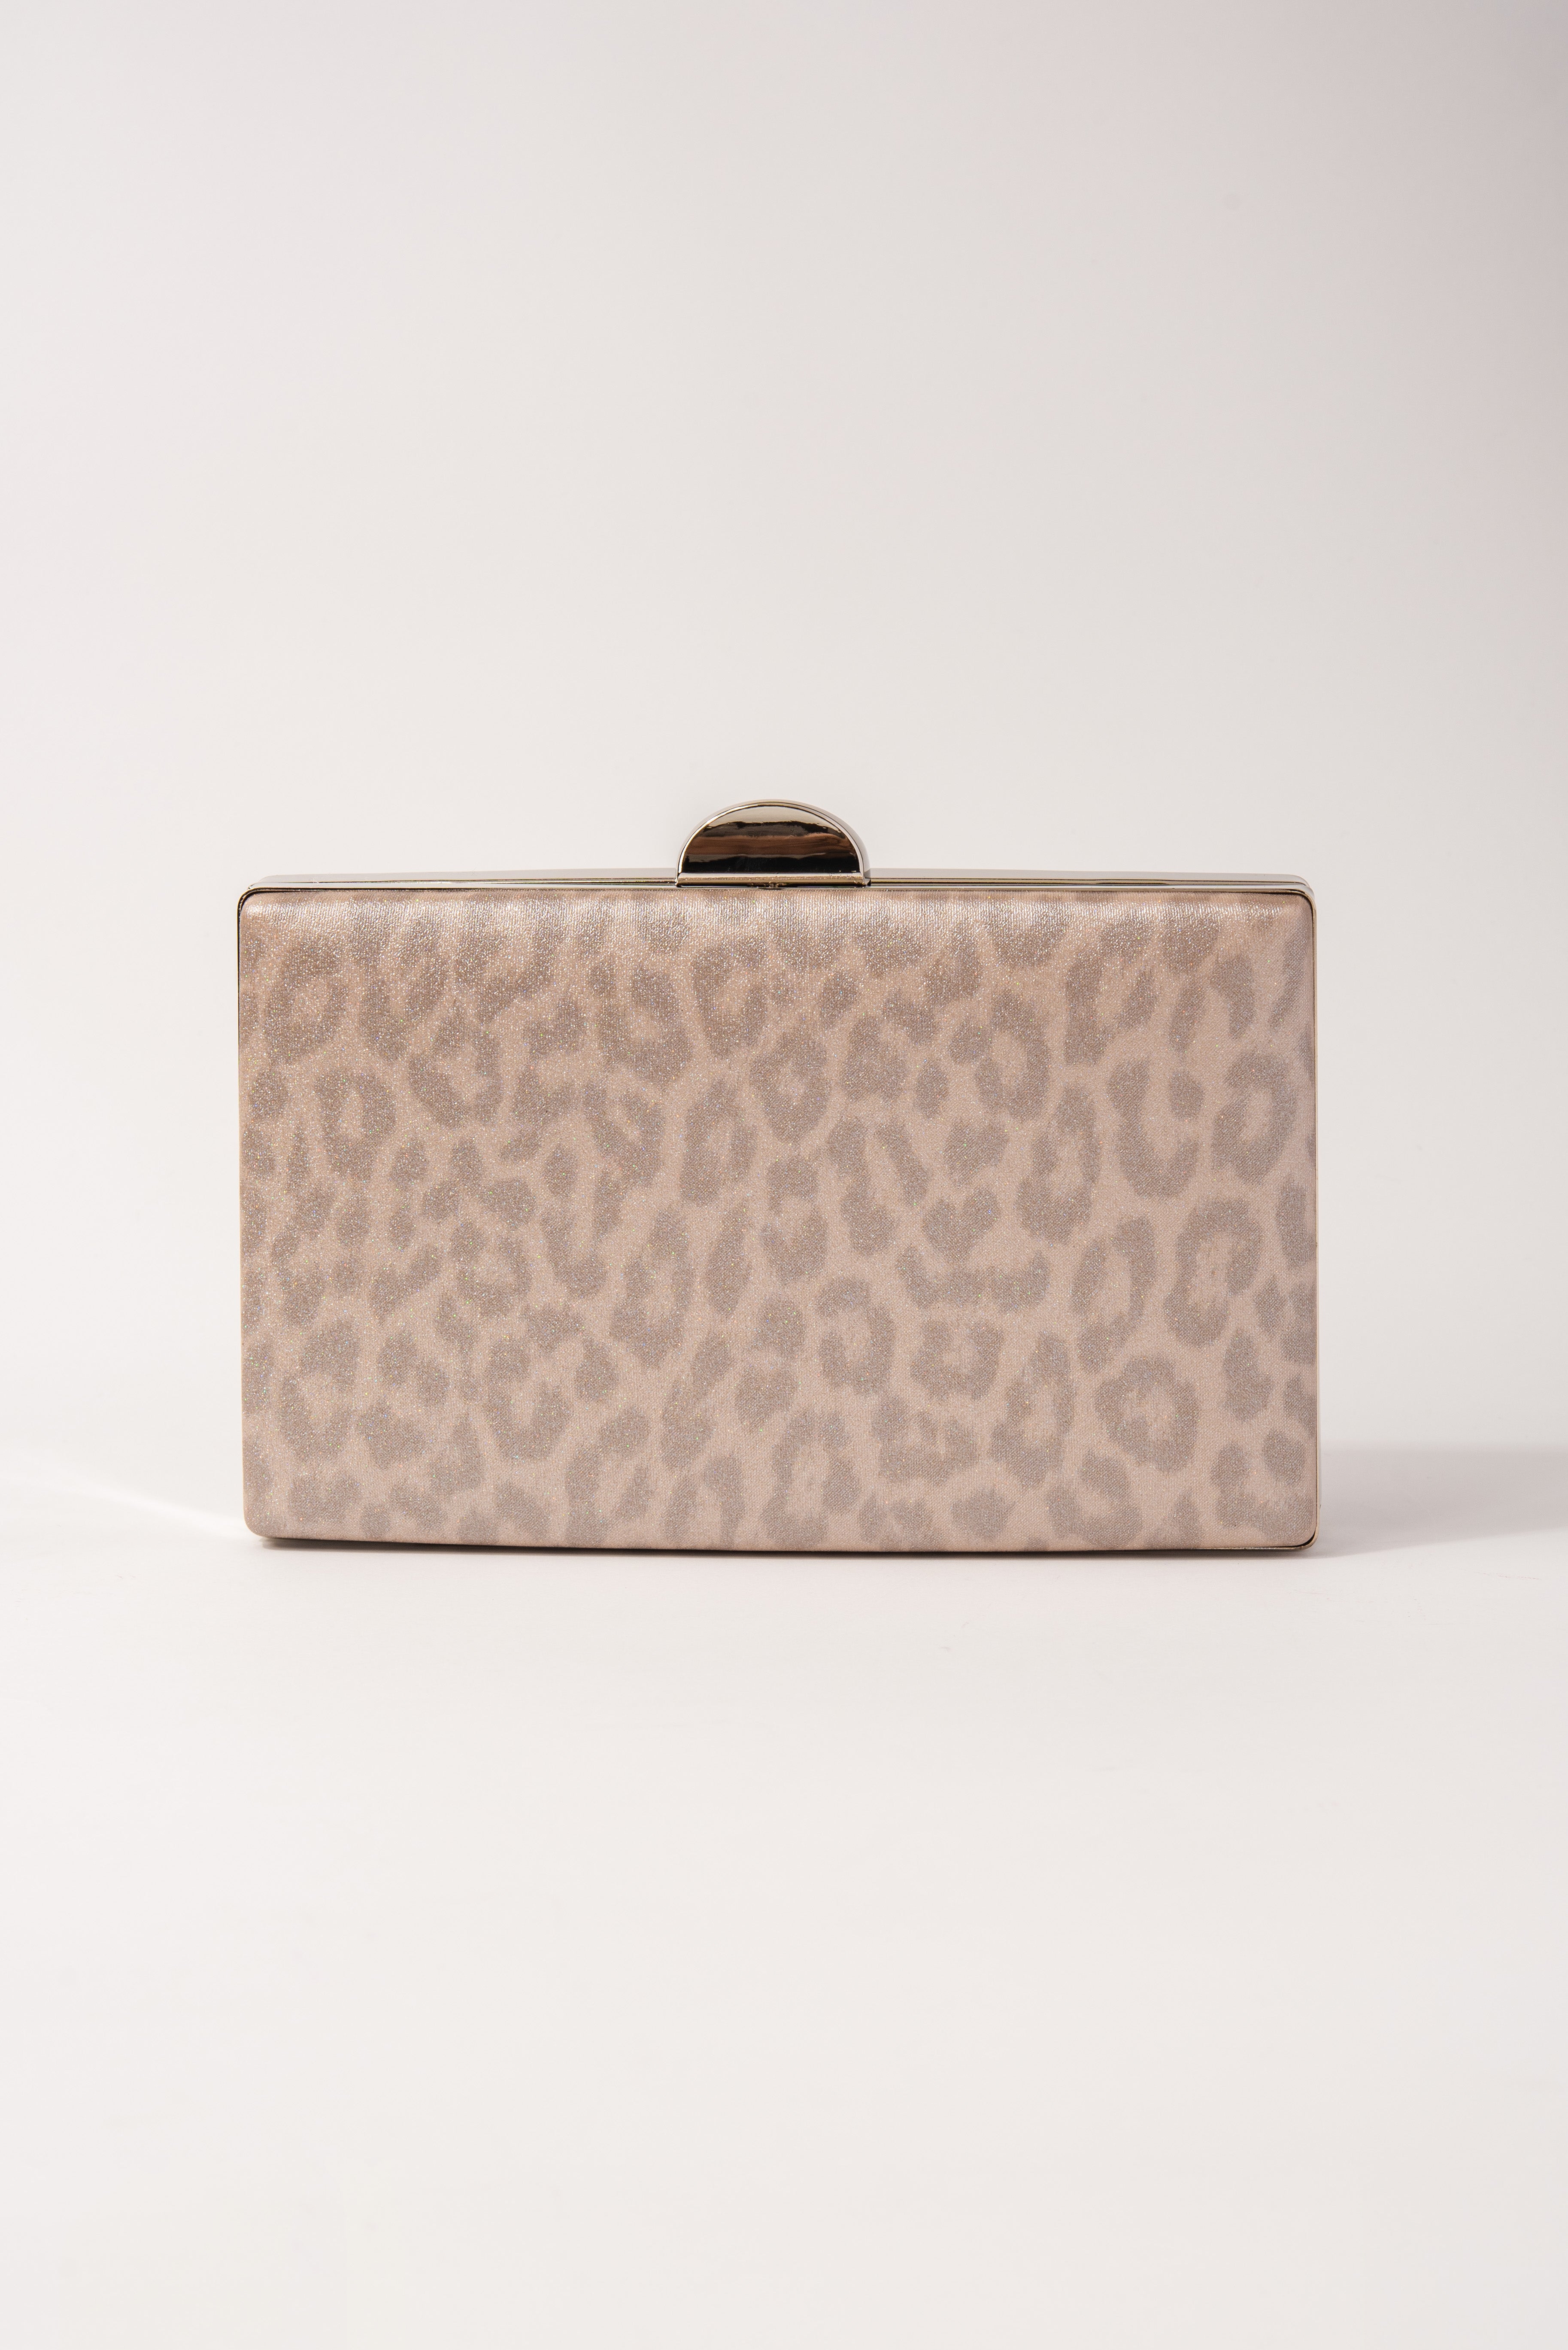 Ulta Beauty The Vintage Cosmetic Company Leopard Print Cosmetic Bag |  CoolSprings Galleria